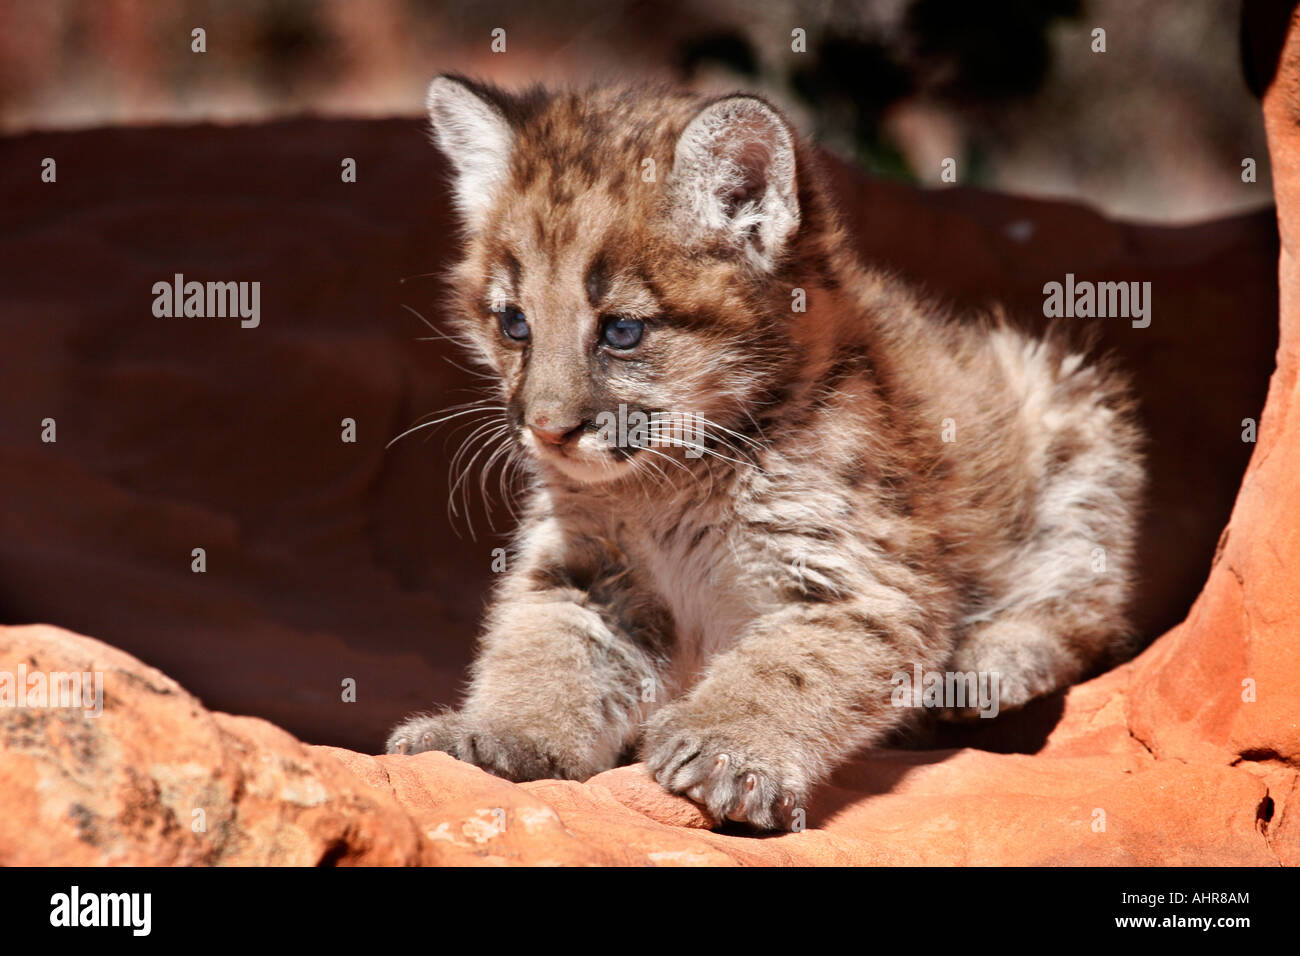 Baby Mountain Lion Cougar In Red Rock Desert Setting Western Usa Stock Photo Alamy